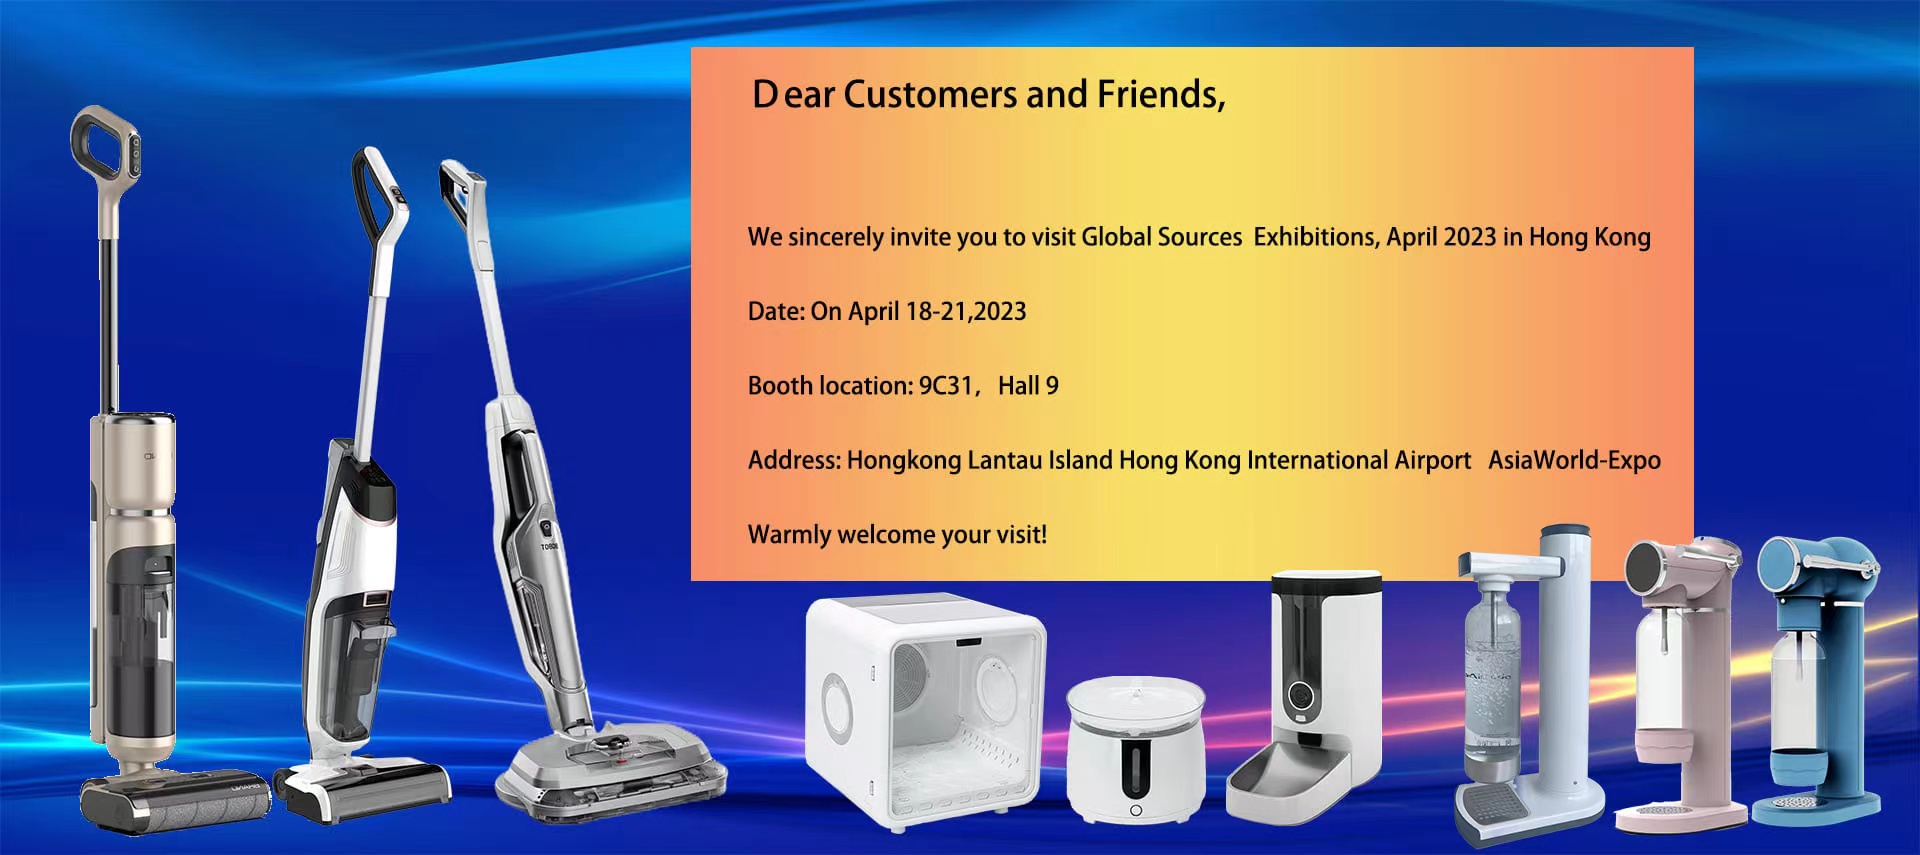 Bengbu MiFan Technology Co., Ltd Invites Visitors to Explore Innovative Cleaning Tools at Global Sources Exhibitions in Hong Kong - Company News - 3